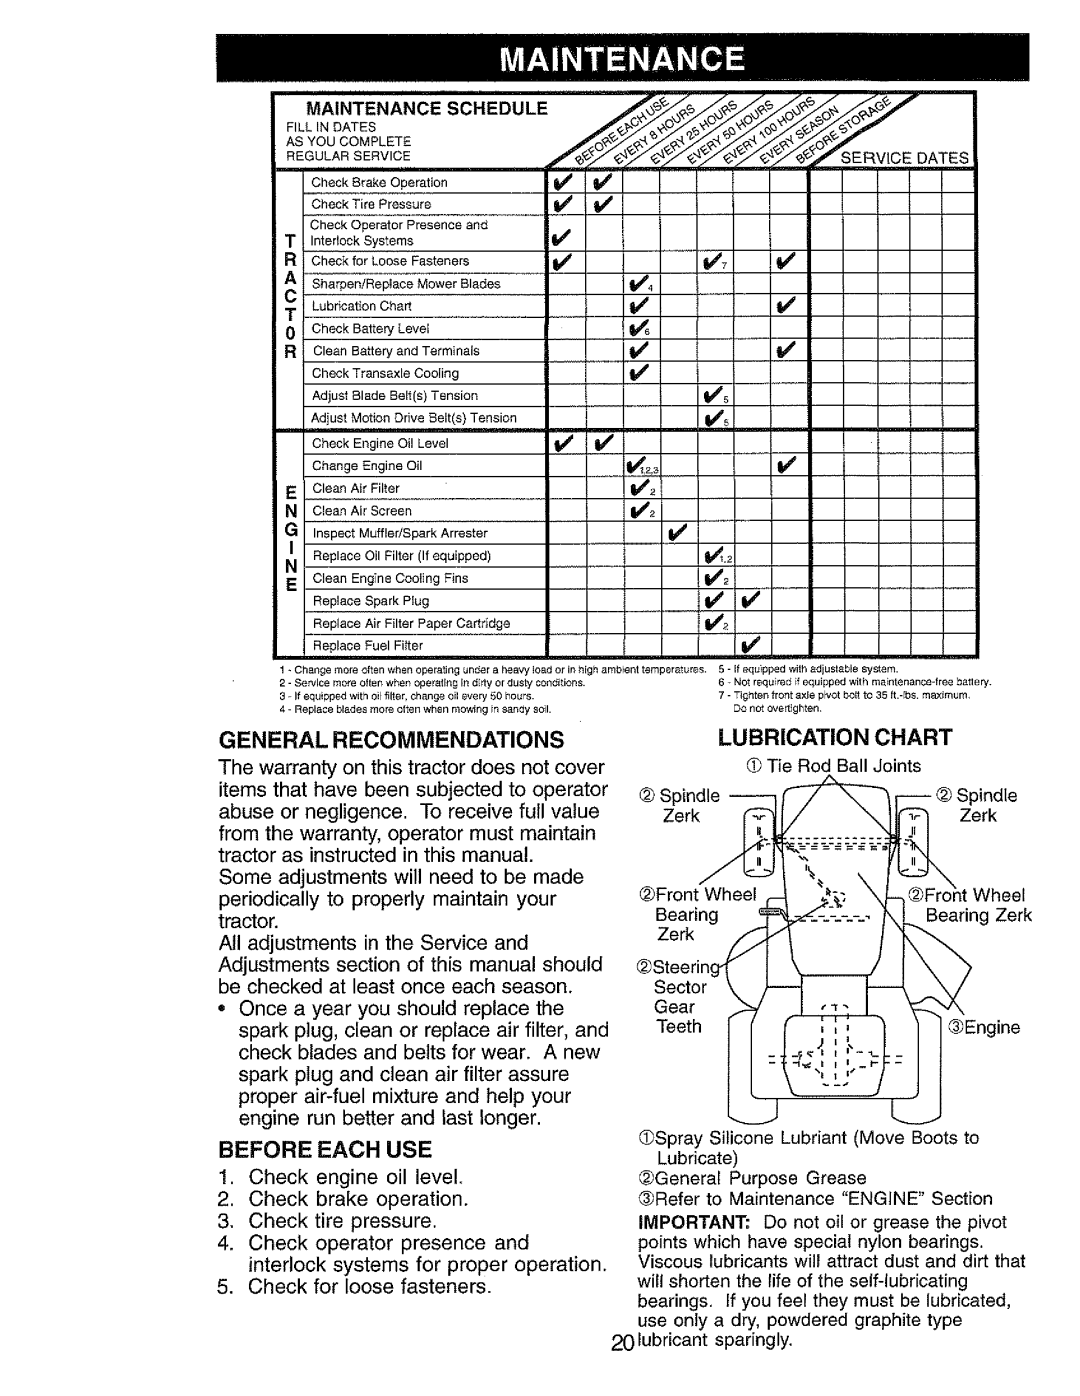 Craftsman 917.273062 owner manual General Recommendations, Before Each USE, Lubrication Chart 